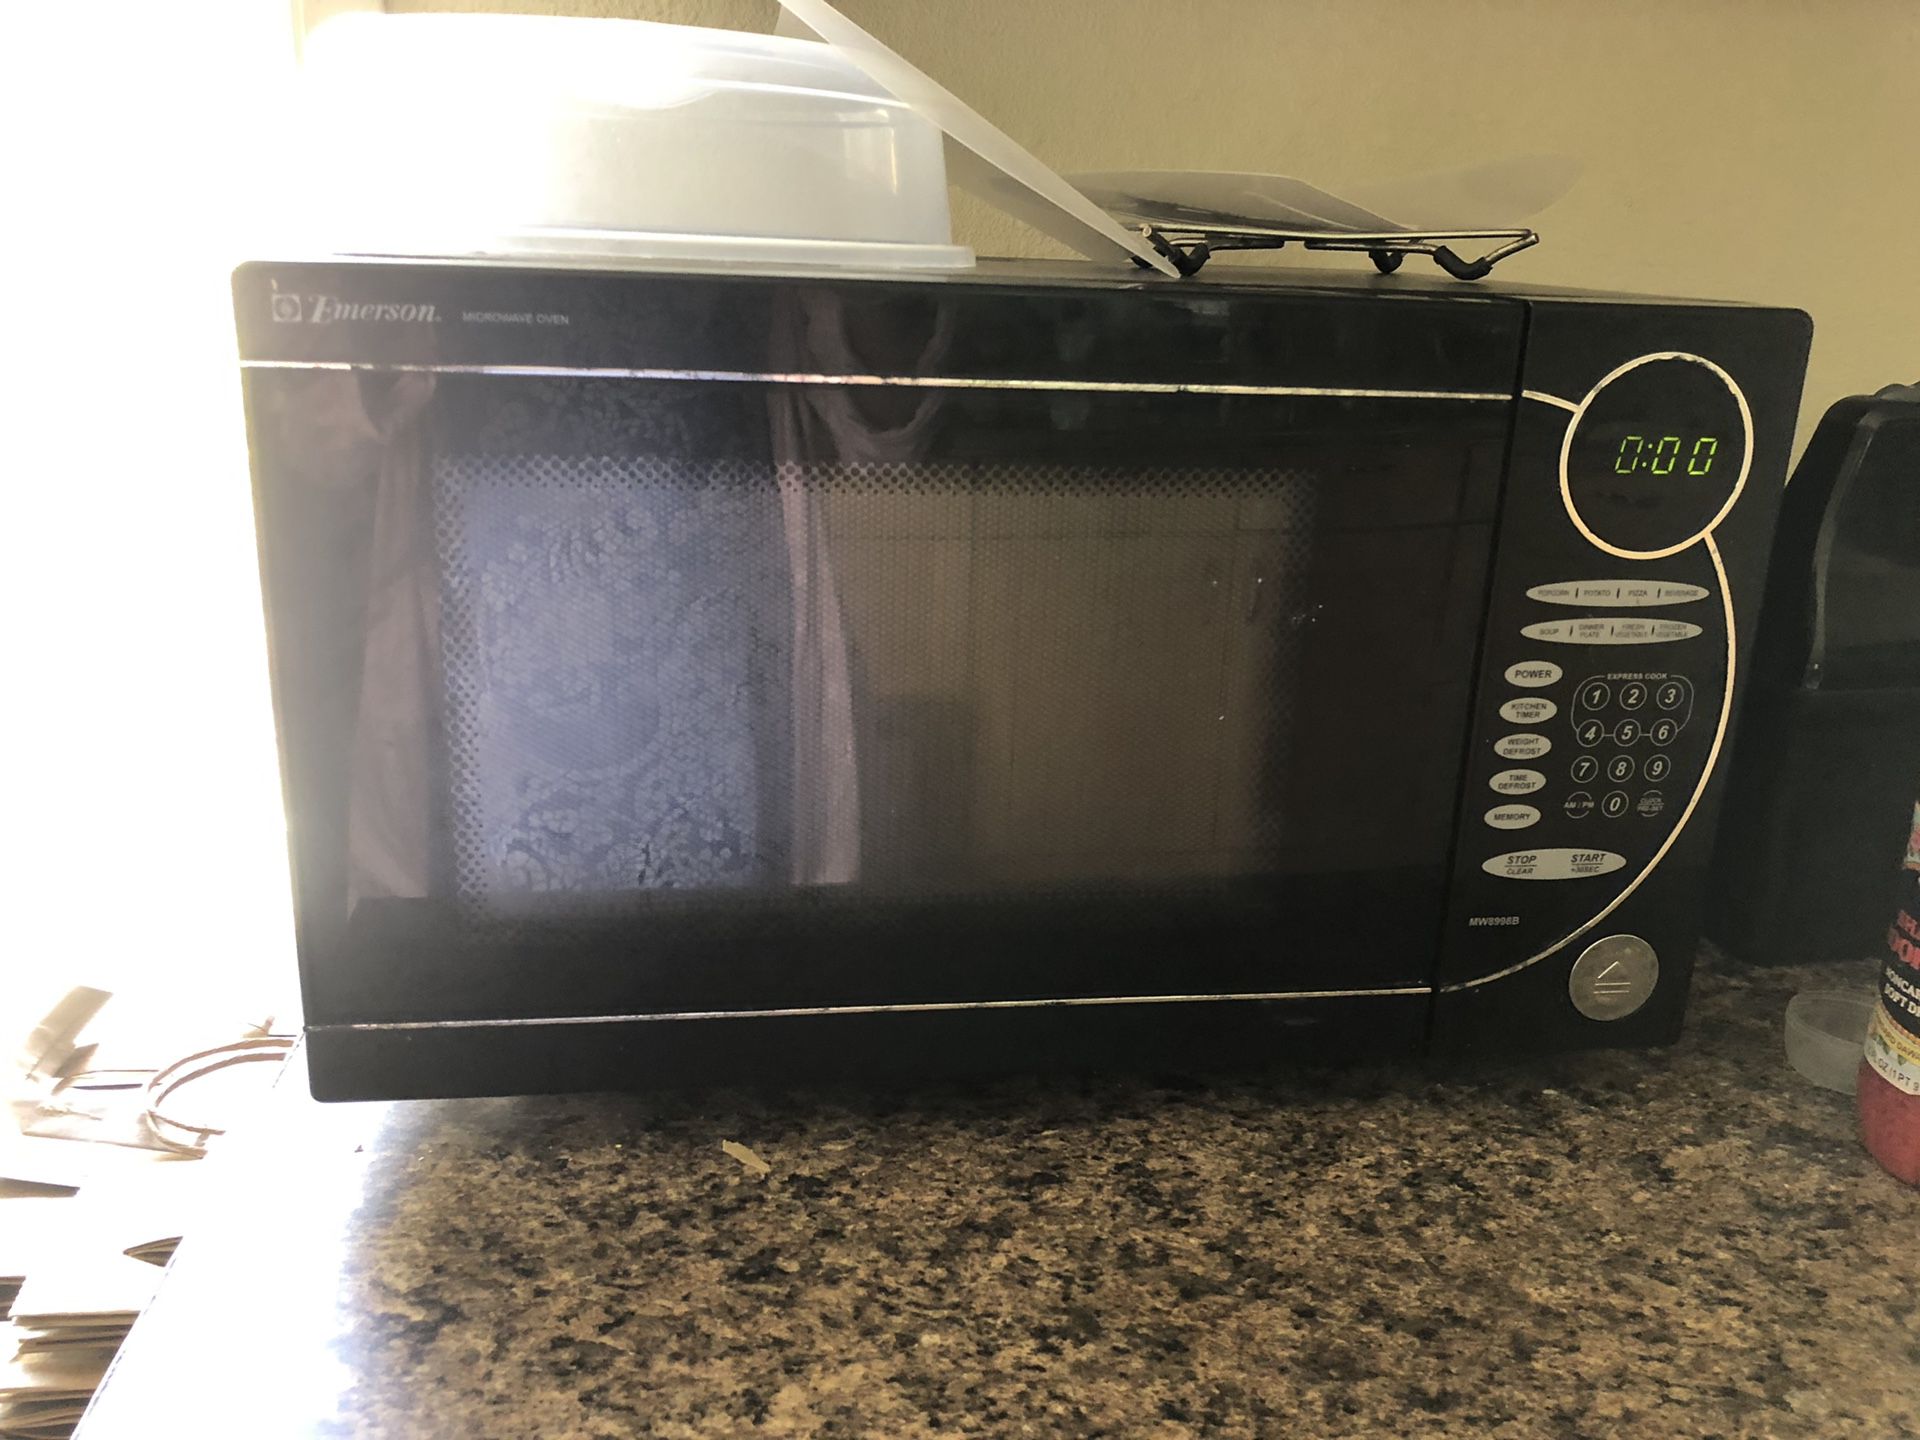 Emerson microwave, works great